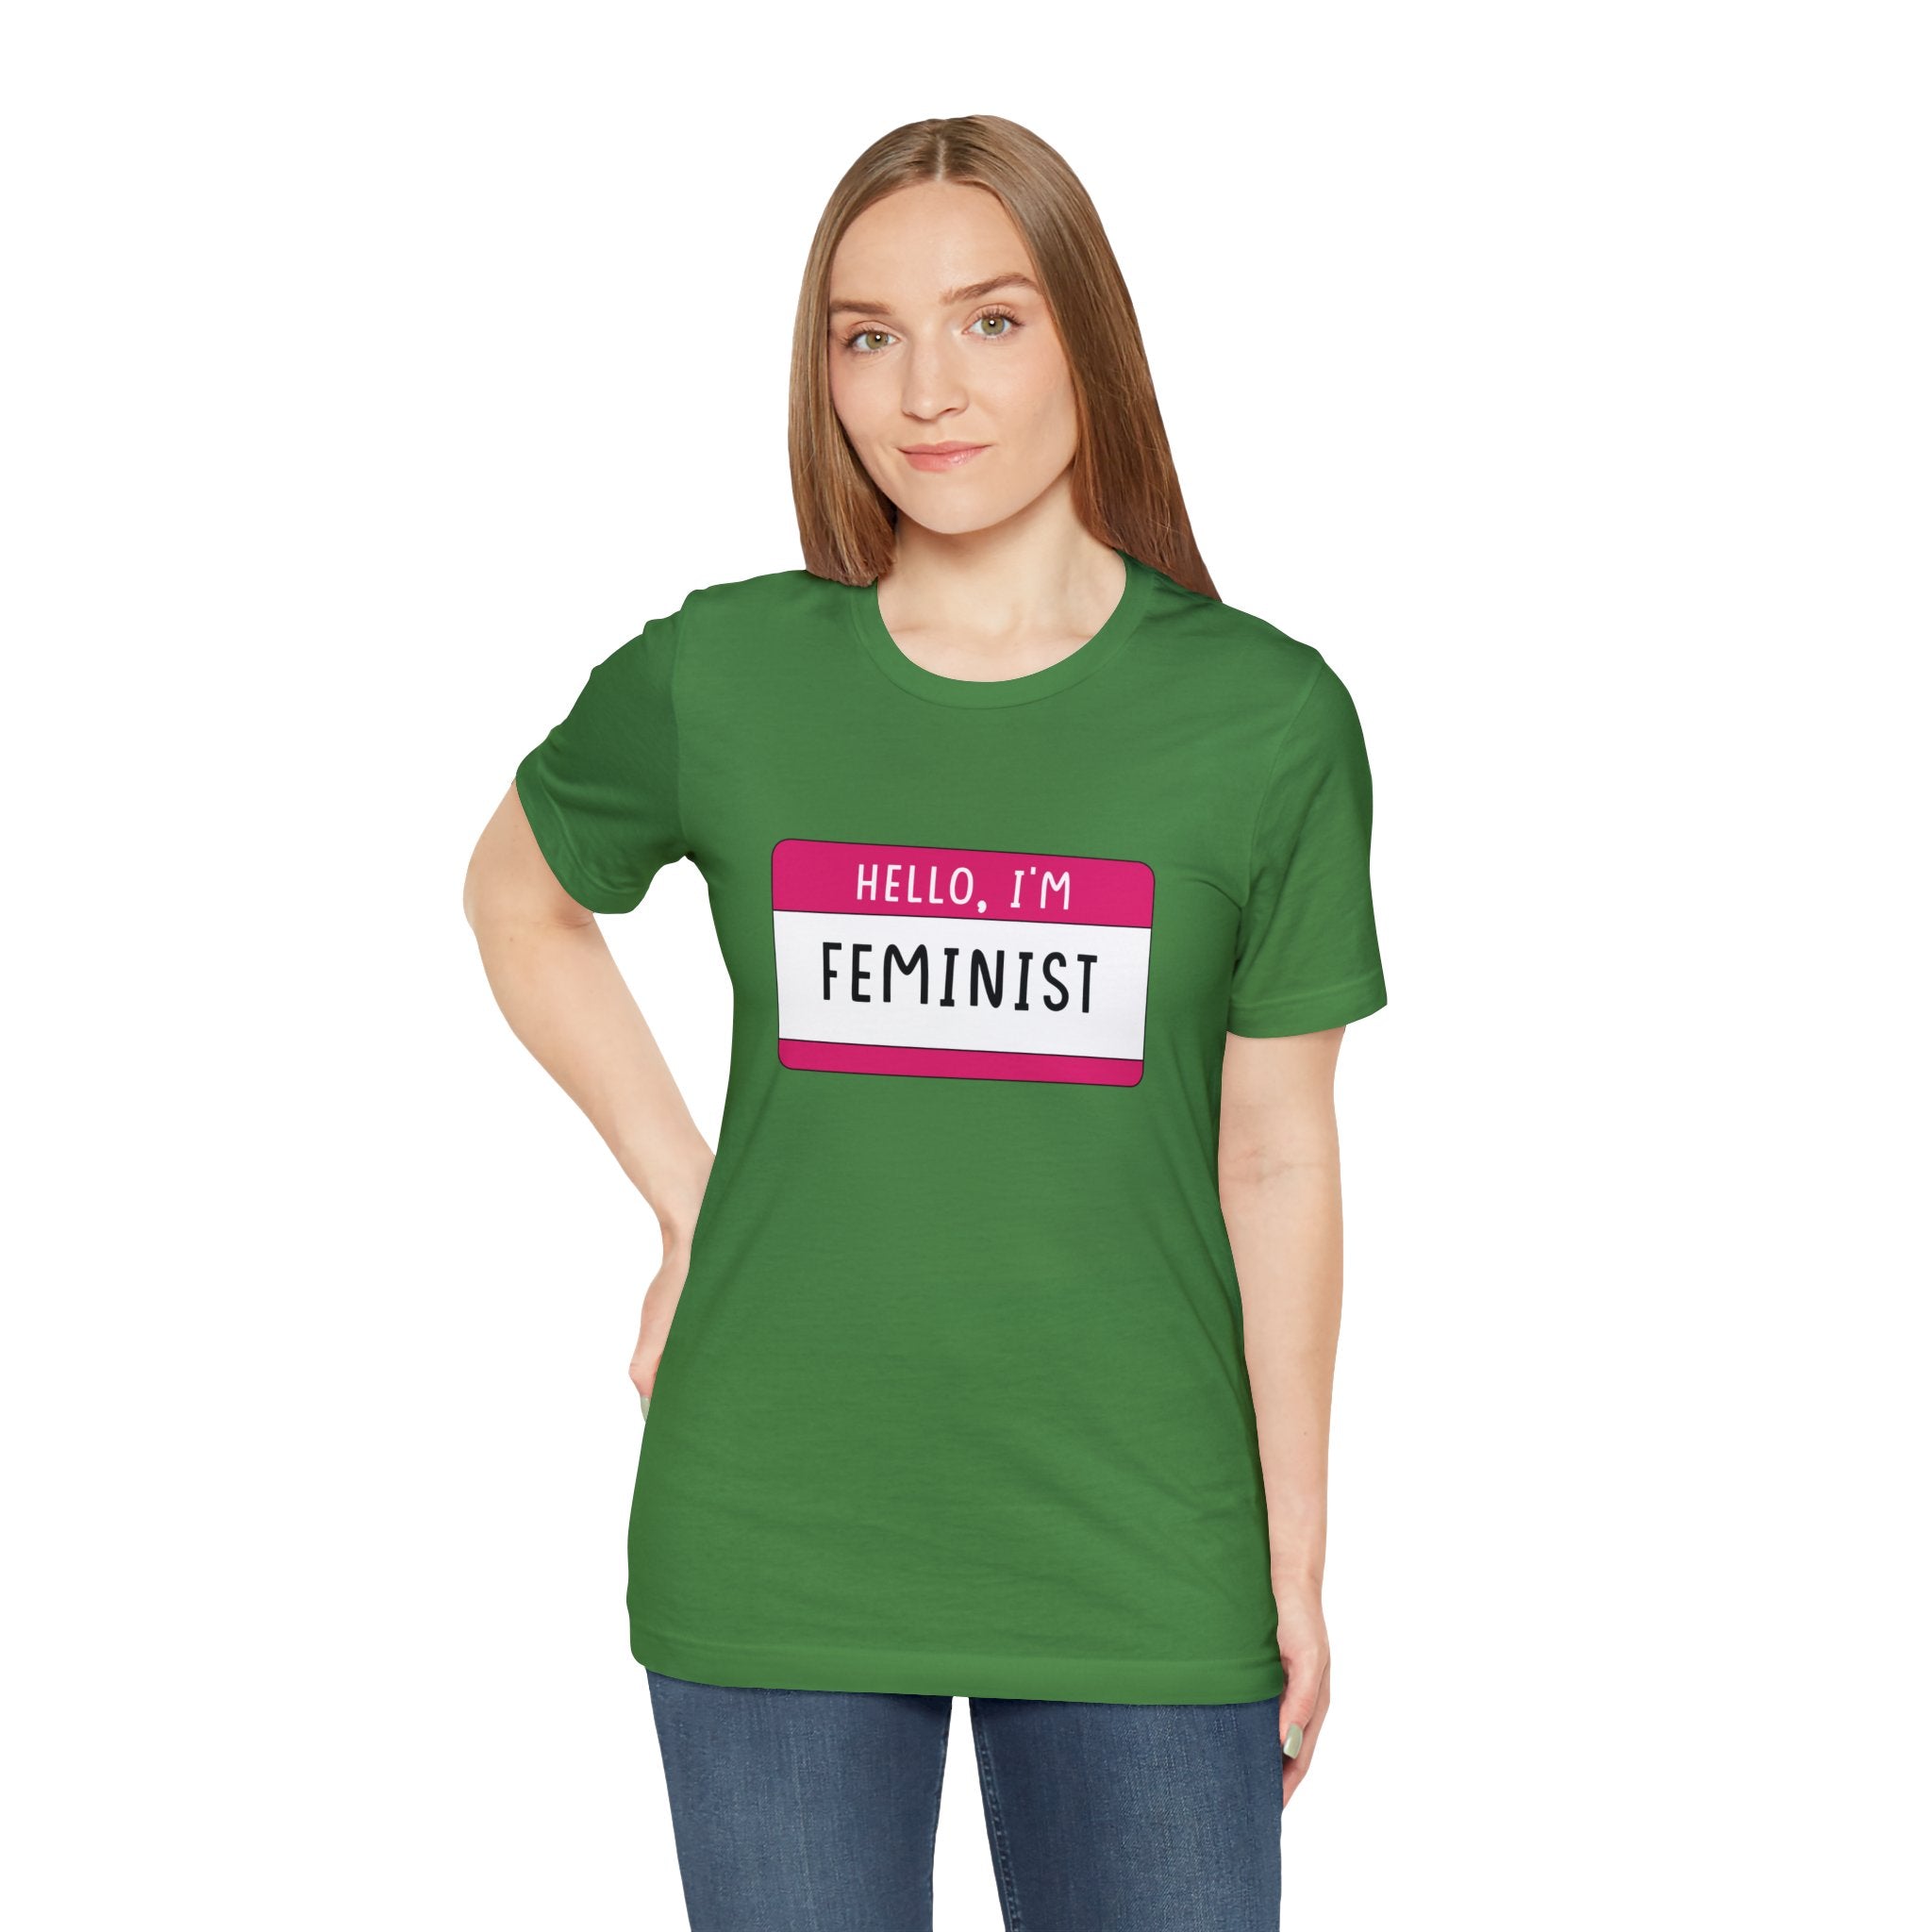 Woman in a green Hello, I'm Feminist T-shirt with an "hello, I'm feminist" badge printed on the front.